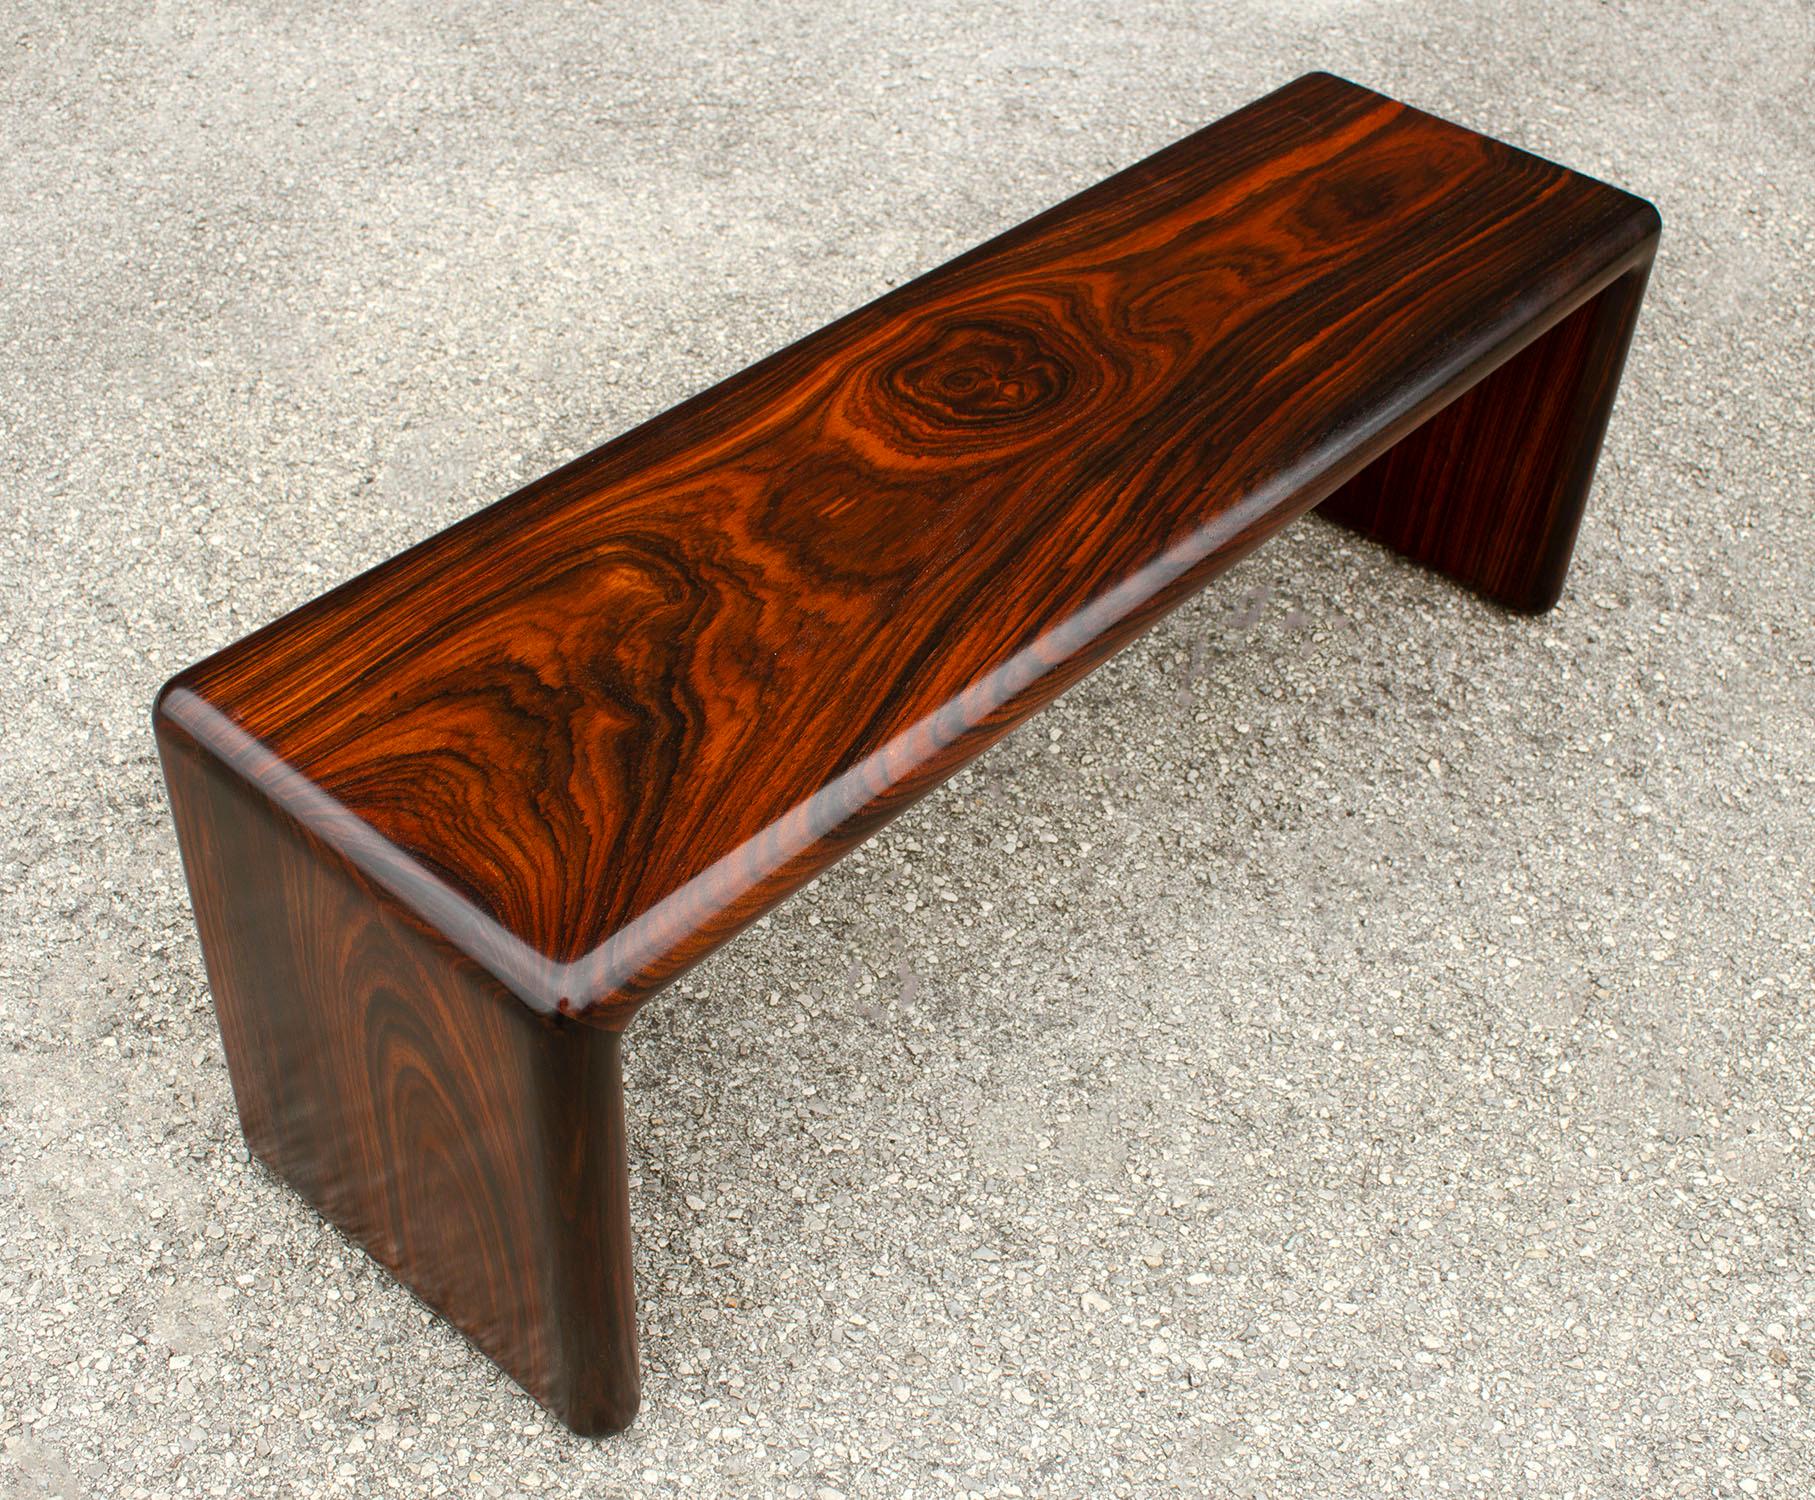 20th Century Don Shoemaker Solid Brazilian Rosewood Table / Bench 1970s Studio Craft Mexico